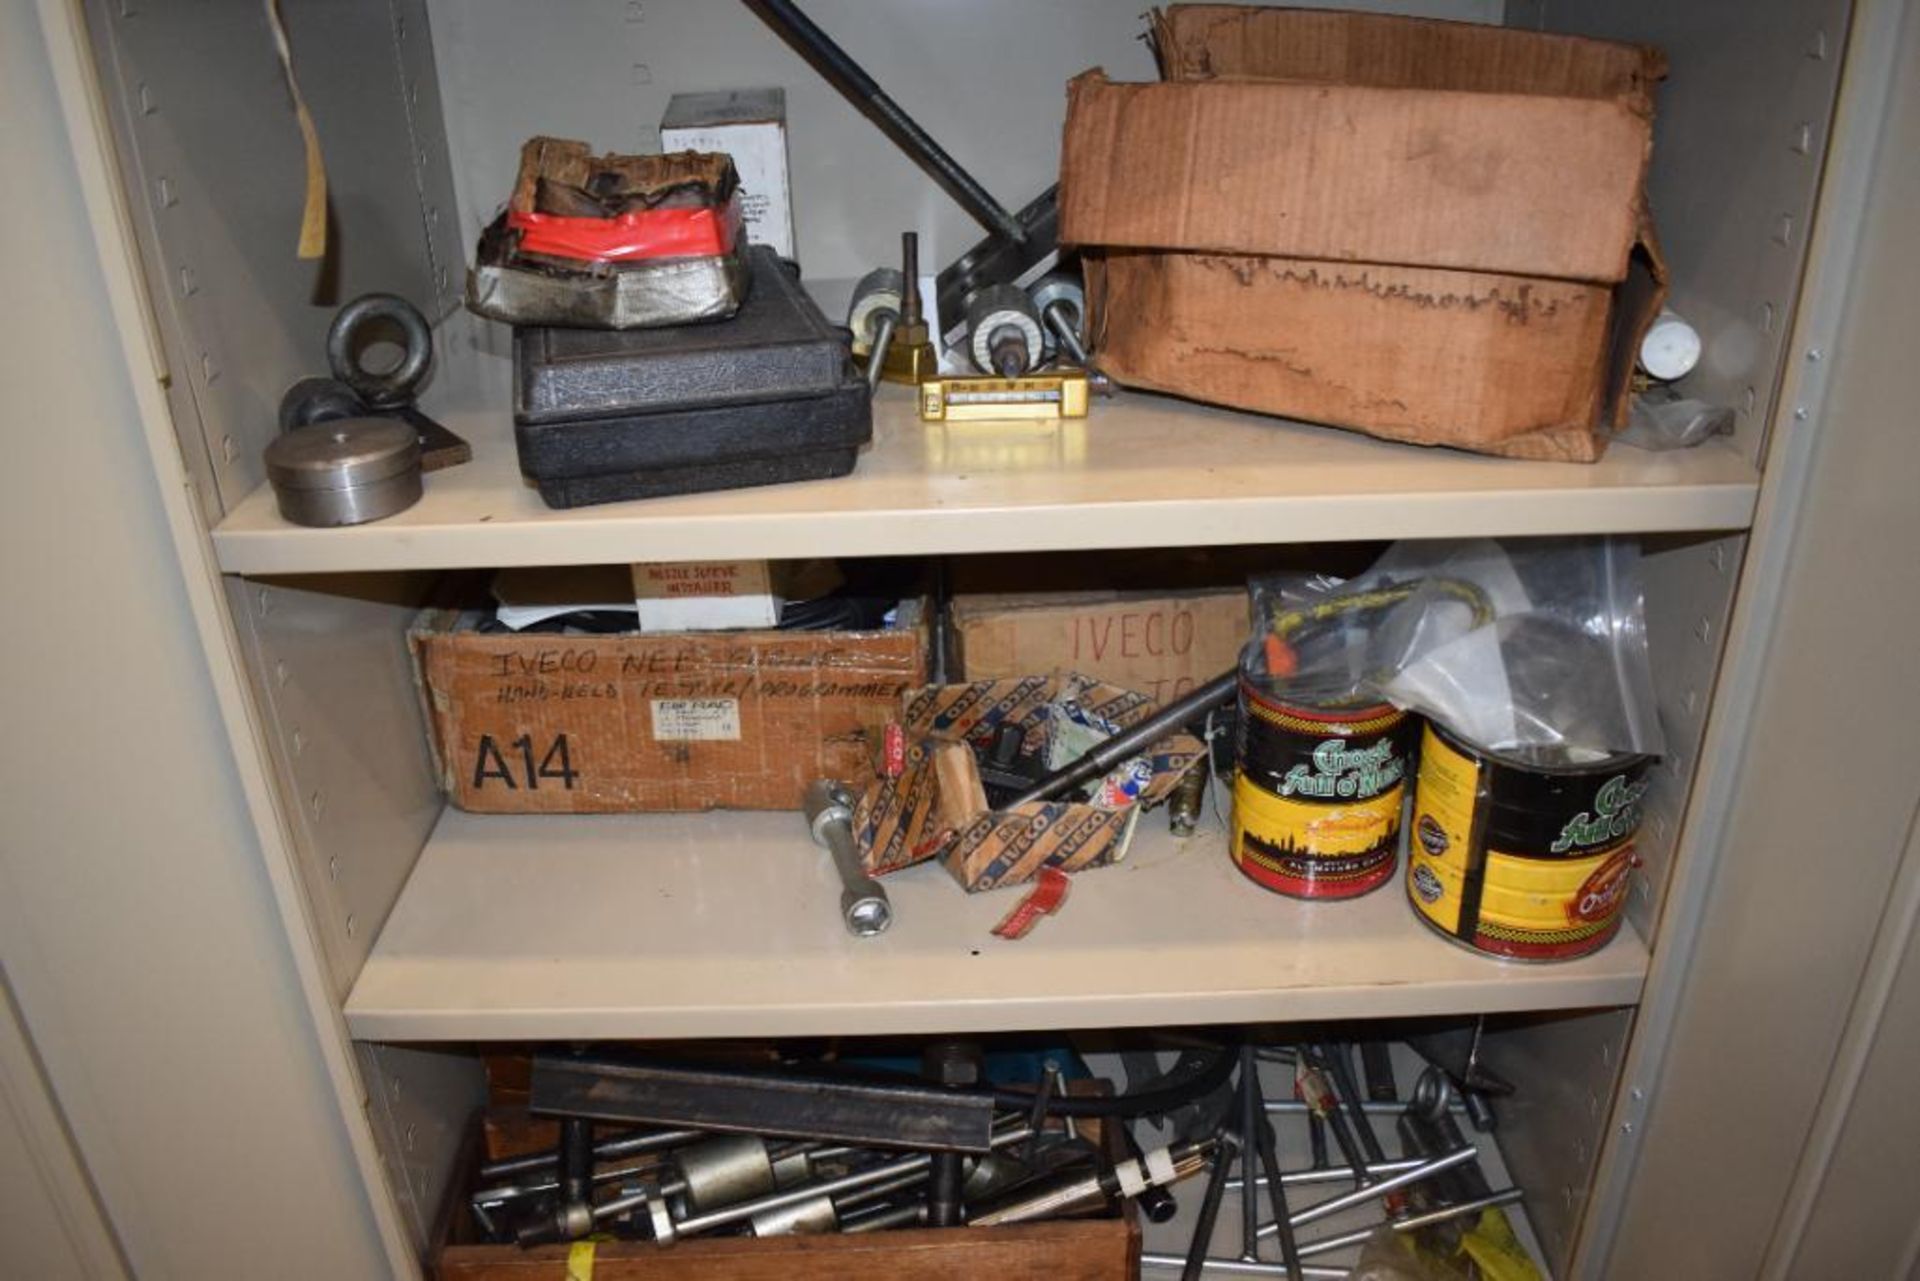 Lot Consisting Of: (2) 2 Door metal cabinets with miscellaneous tools and hardware supplies, includi - Image 8 of 9